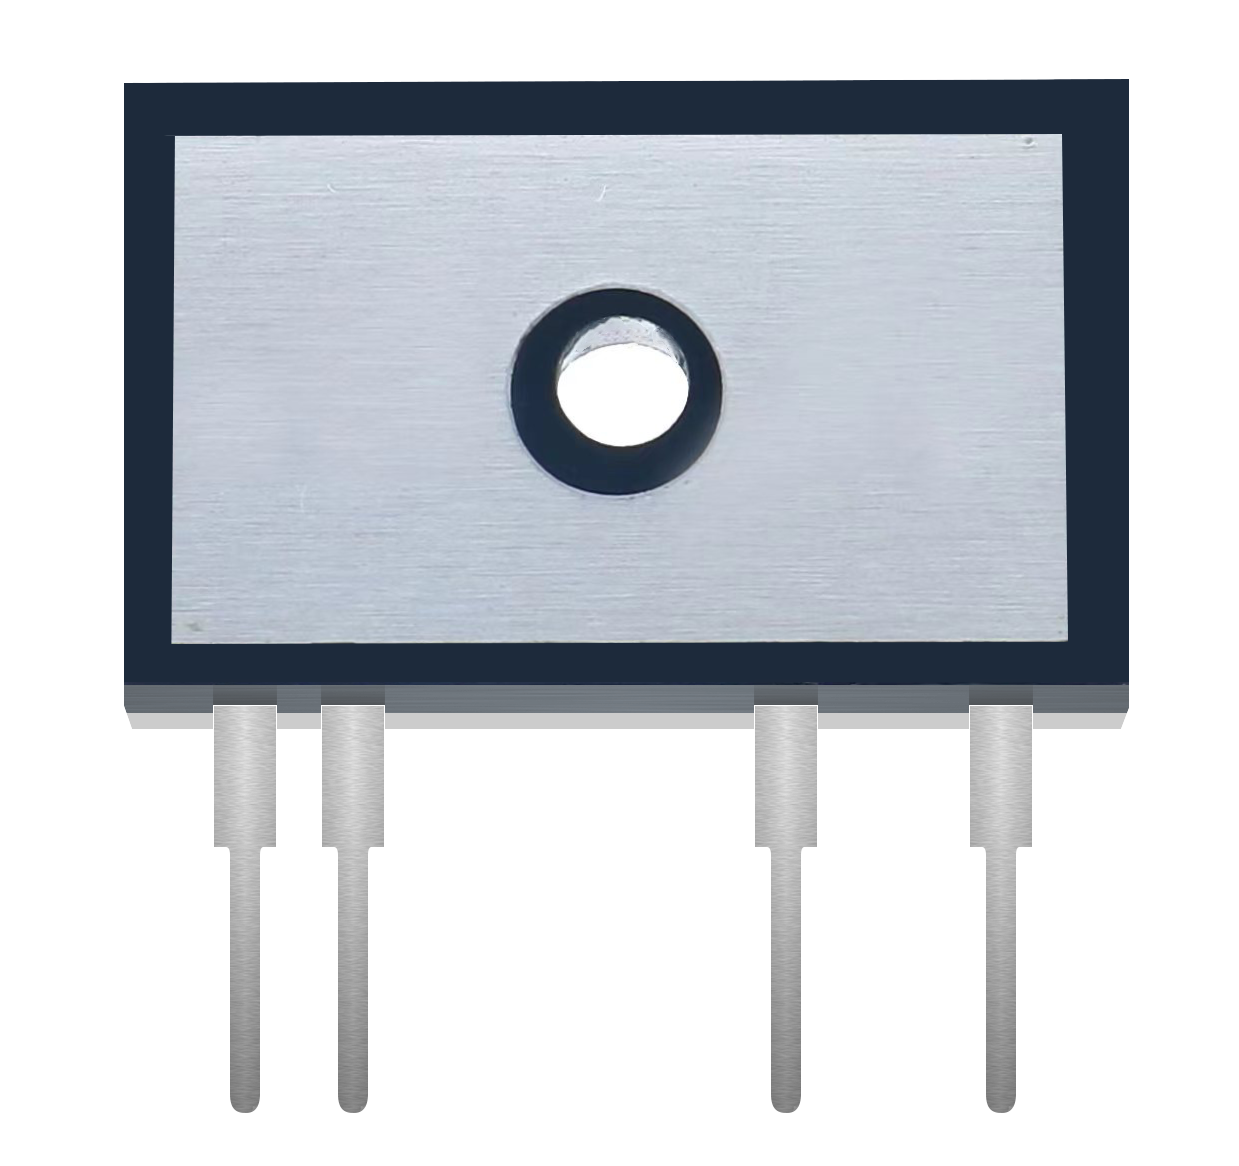 ZSA series PCB mounted single phase solid state relay DC to AC 5A